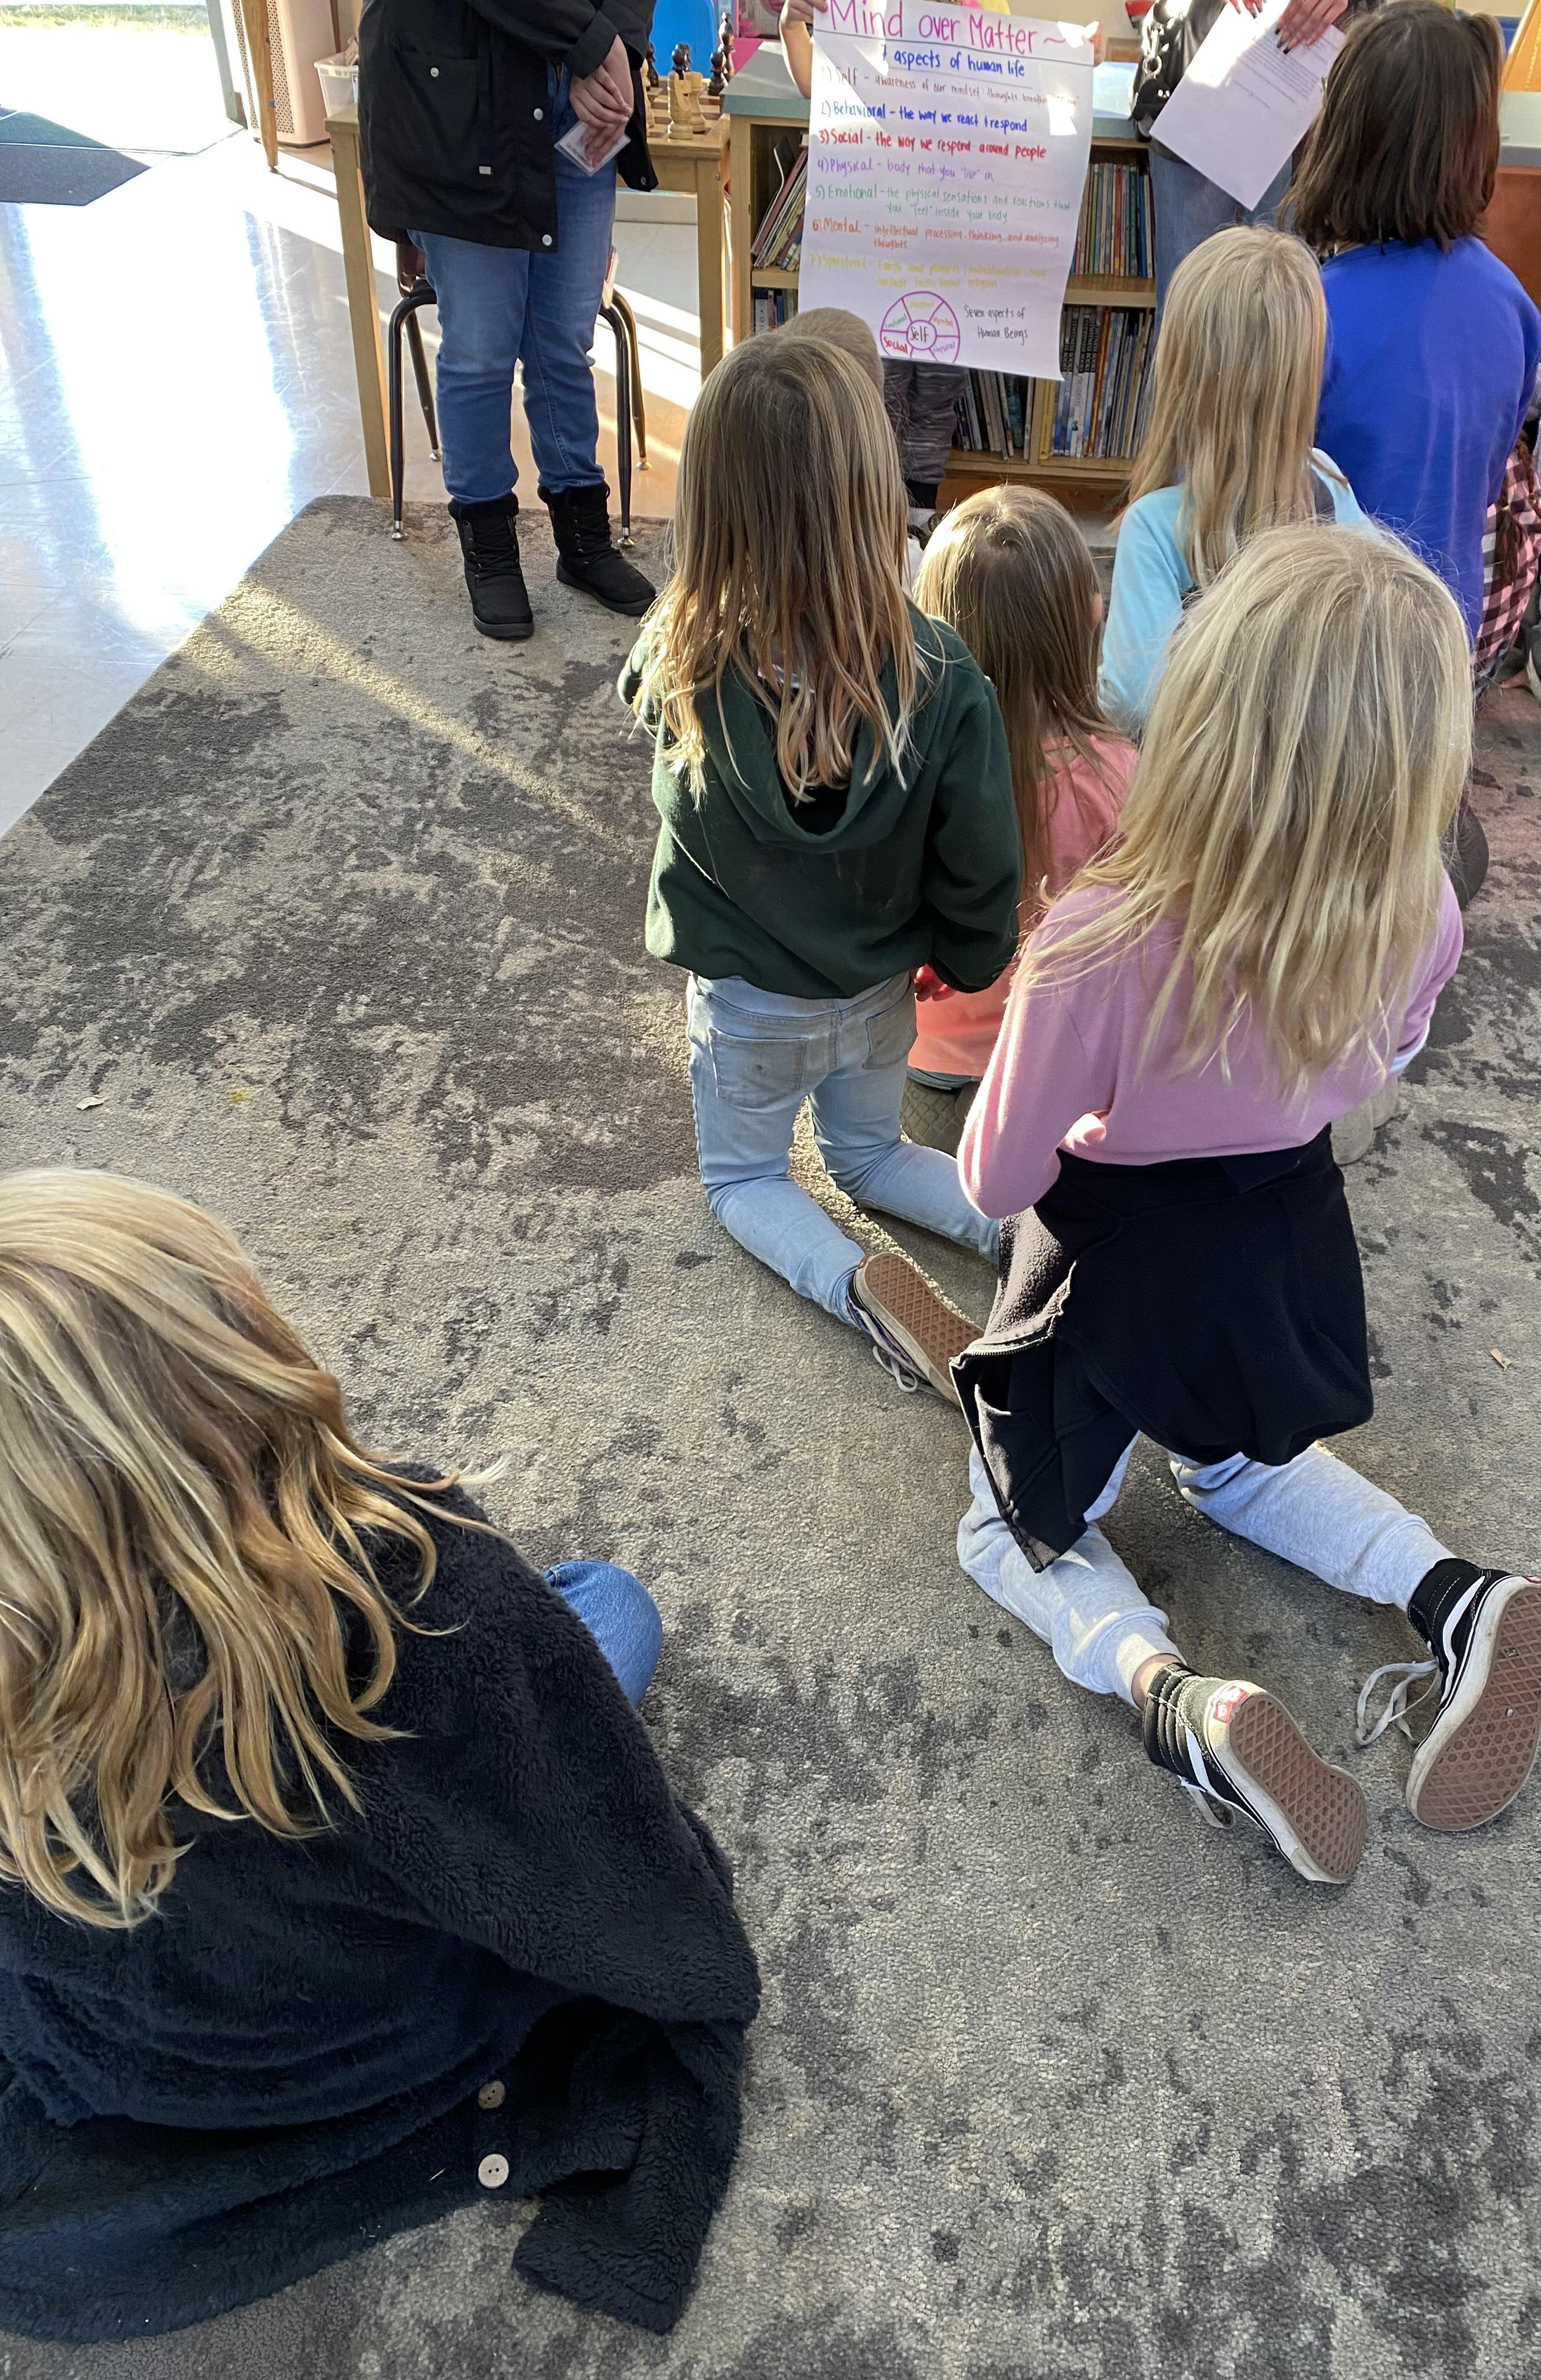 A small group of elementary school students gather during an after school activity hosted by YMP volunteers called "Mind Over Matter" which focused on age-appropriate emotions and wellness habits